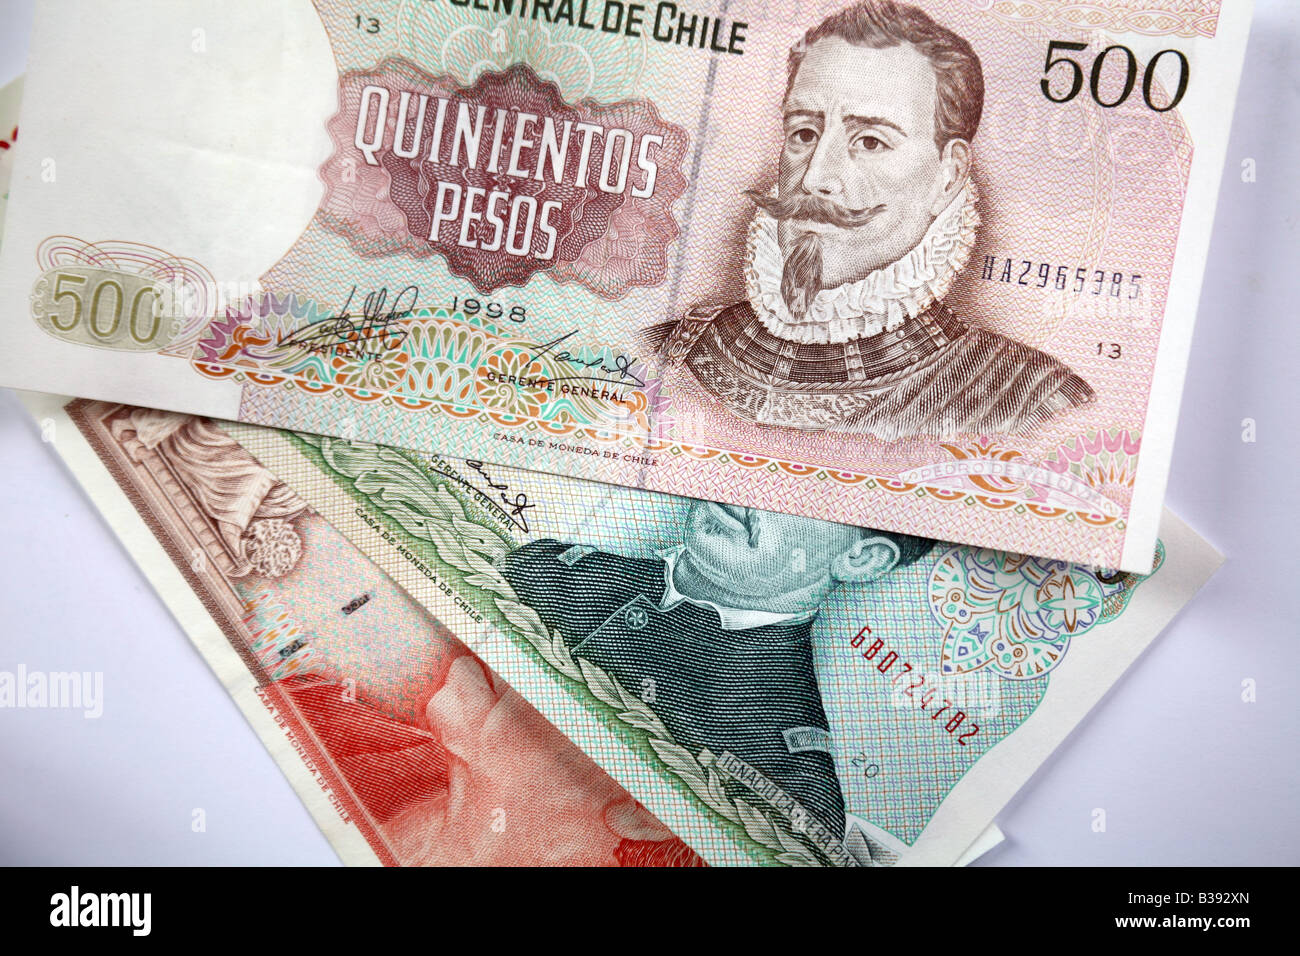 Bank notes from Chile Banco Central de Chile Stock Photo